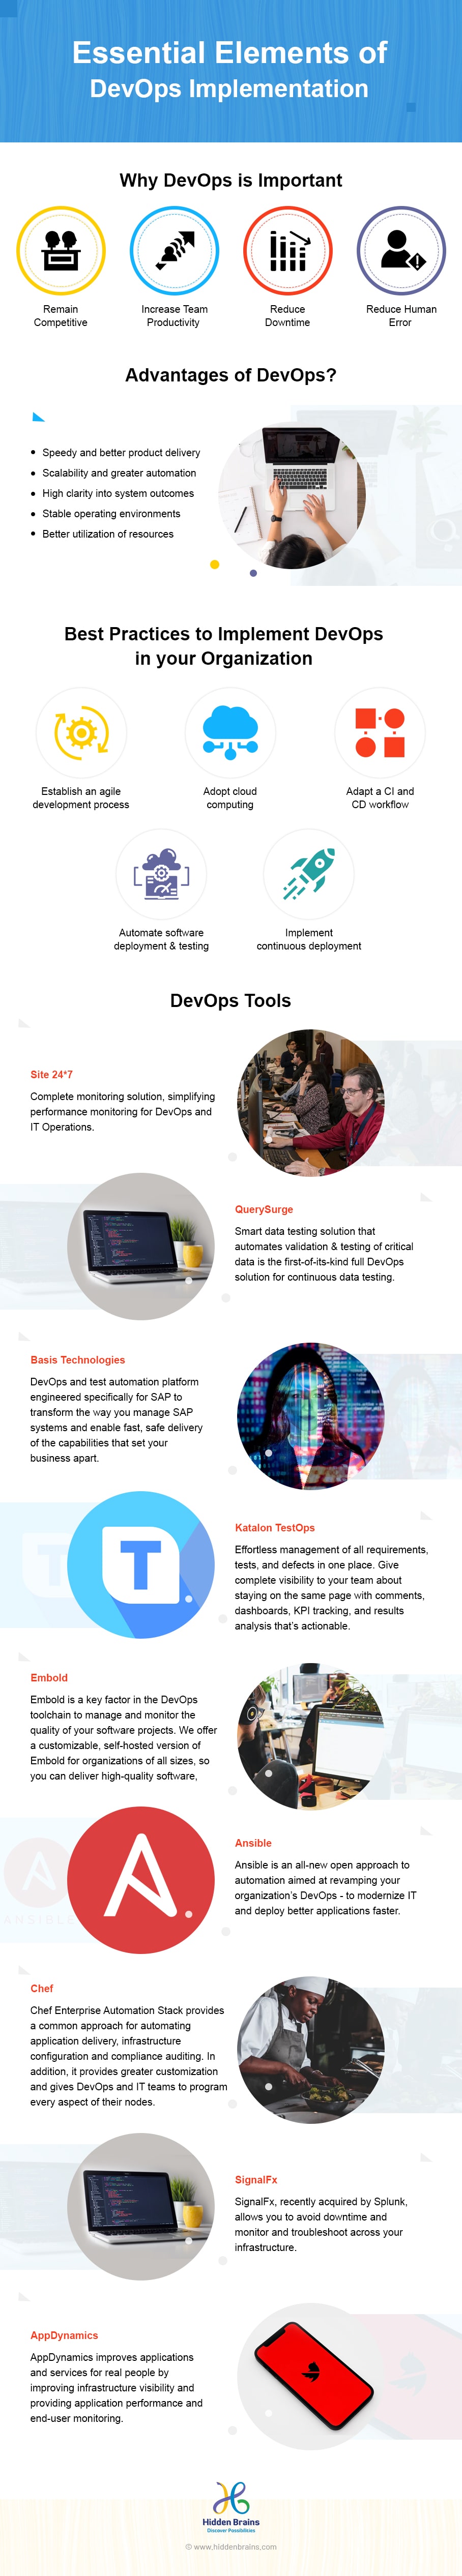 How to Implement DevOps [Infographic]